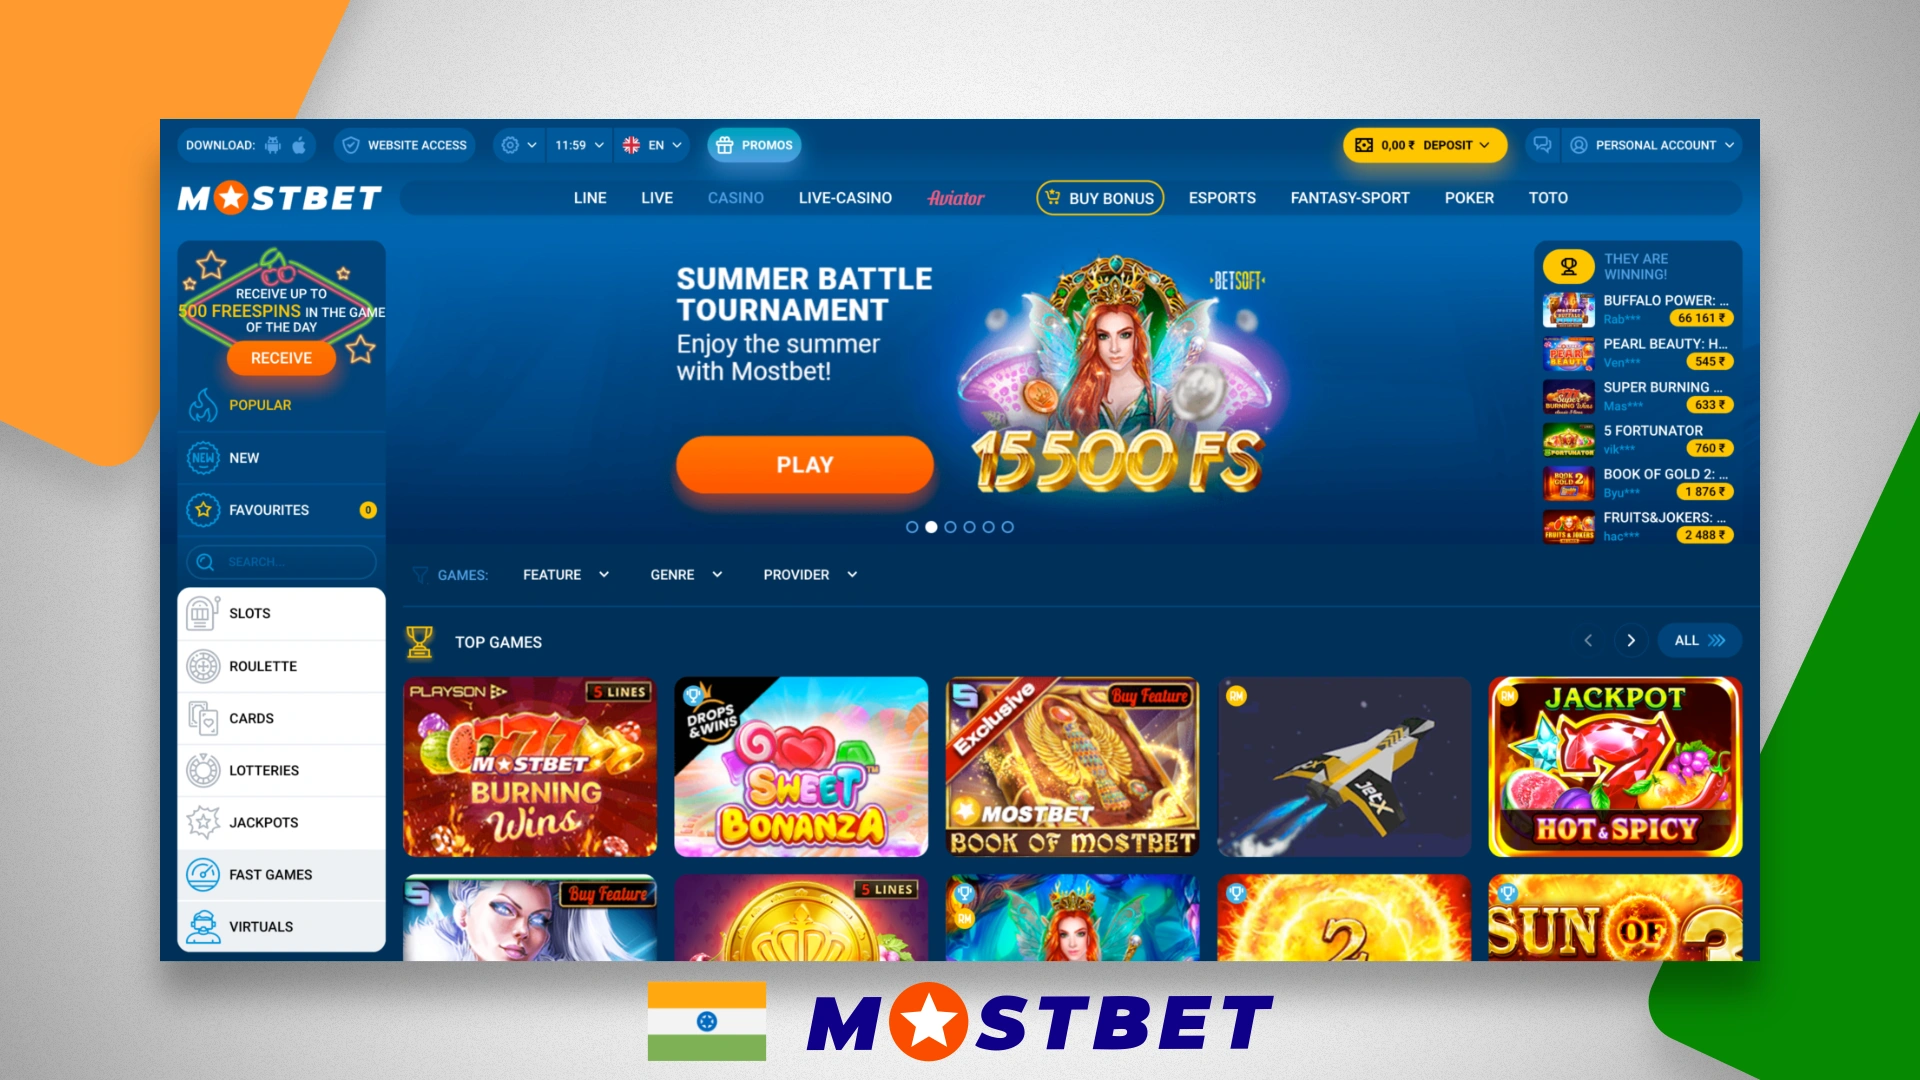 List of popular games on Mostbet, played by millions of Indians